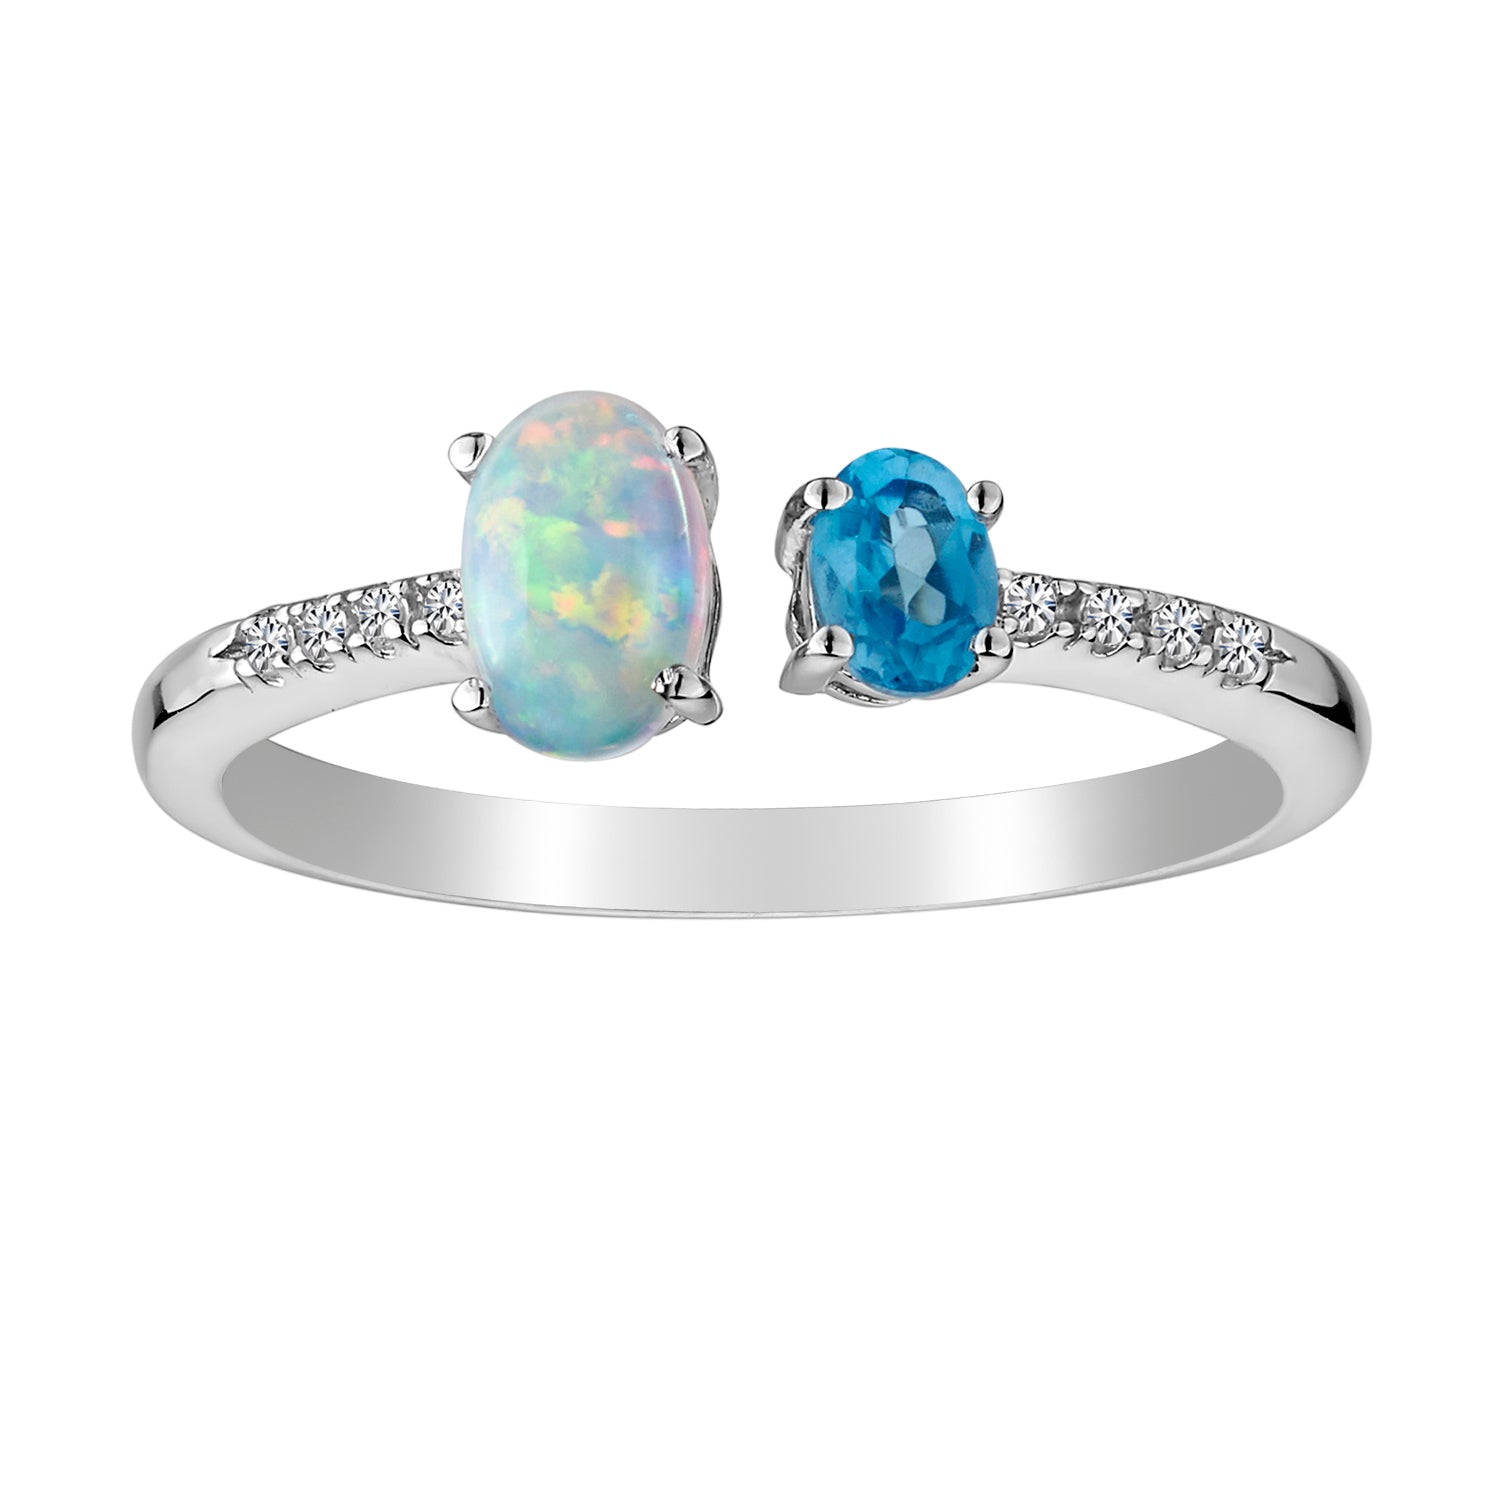 Swiss Blue Topaz Created Opal & White Sapphire Ring,  Sterling Silver. Gemstone Rings. Griffin Jewellery Designs